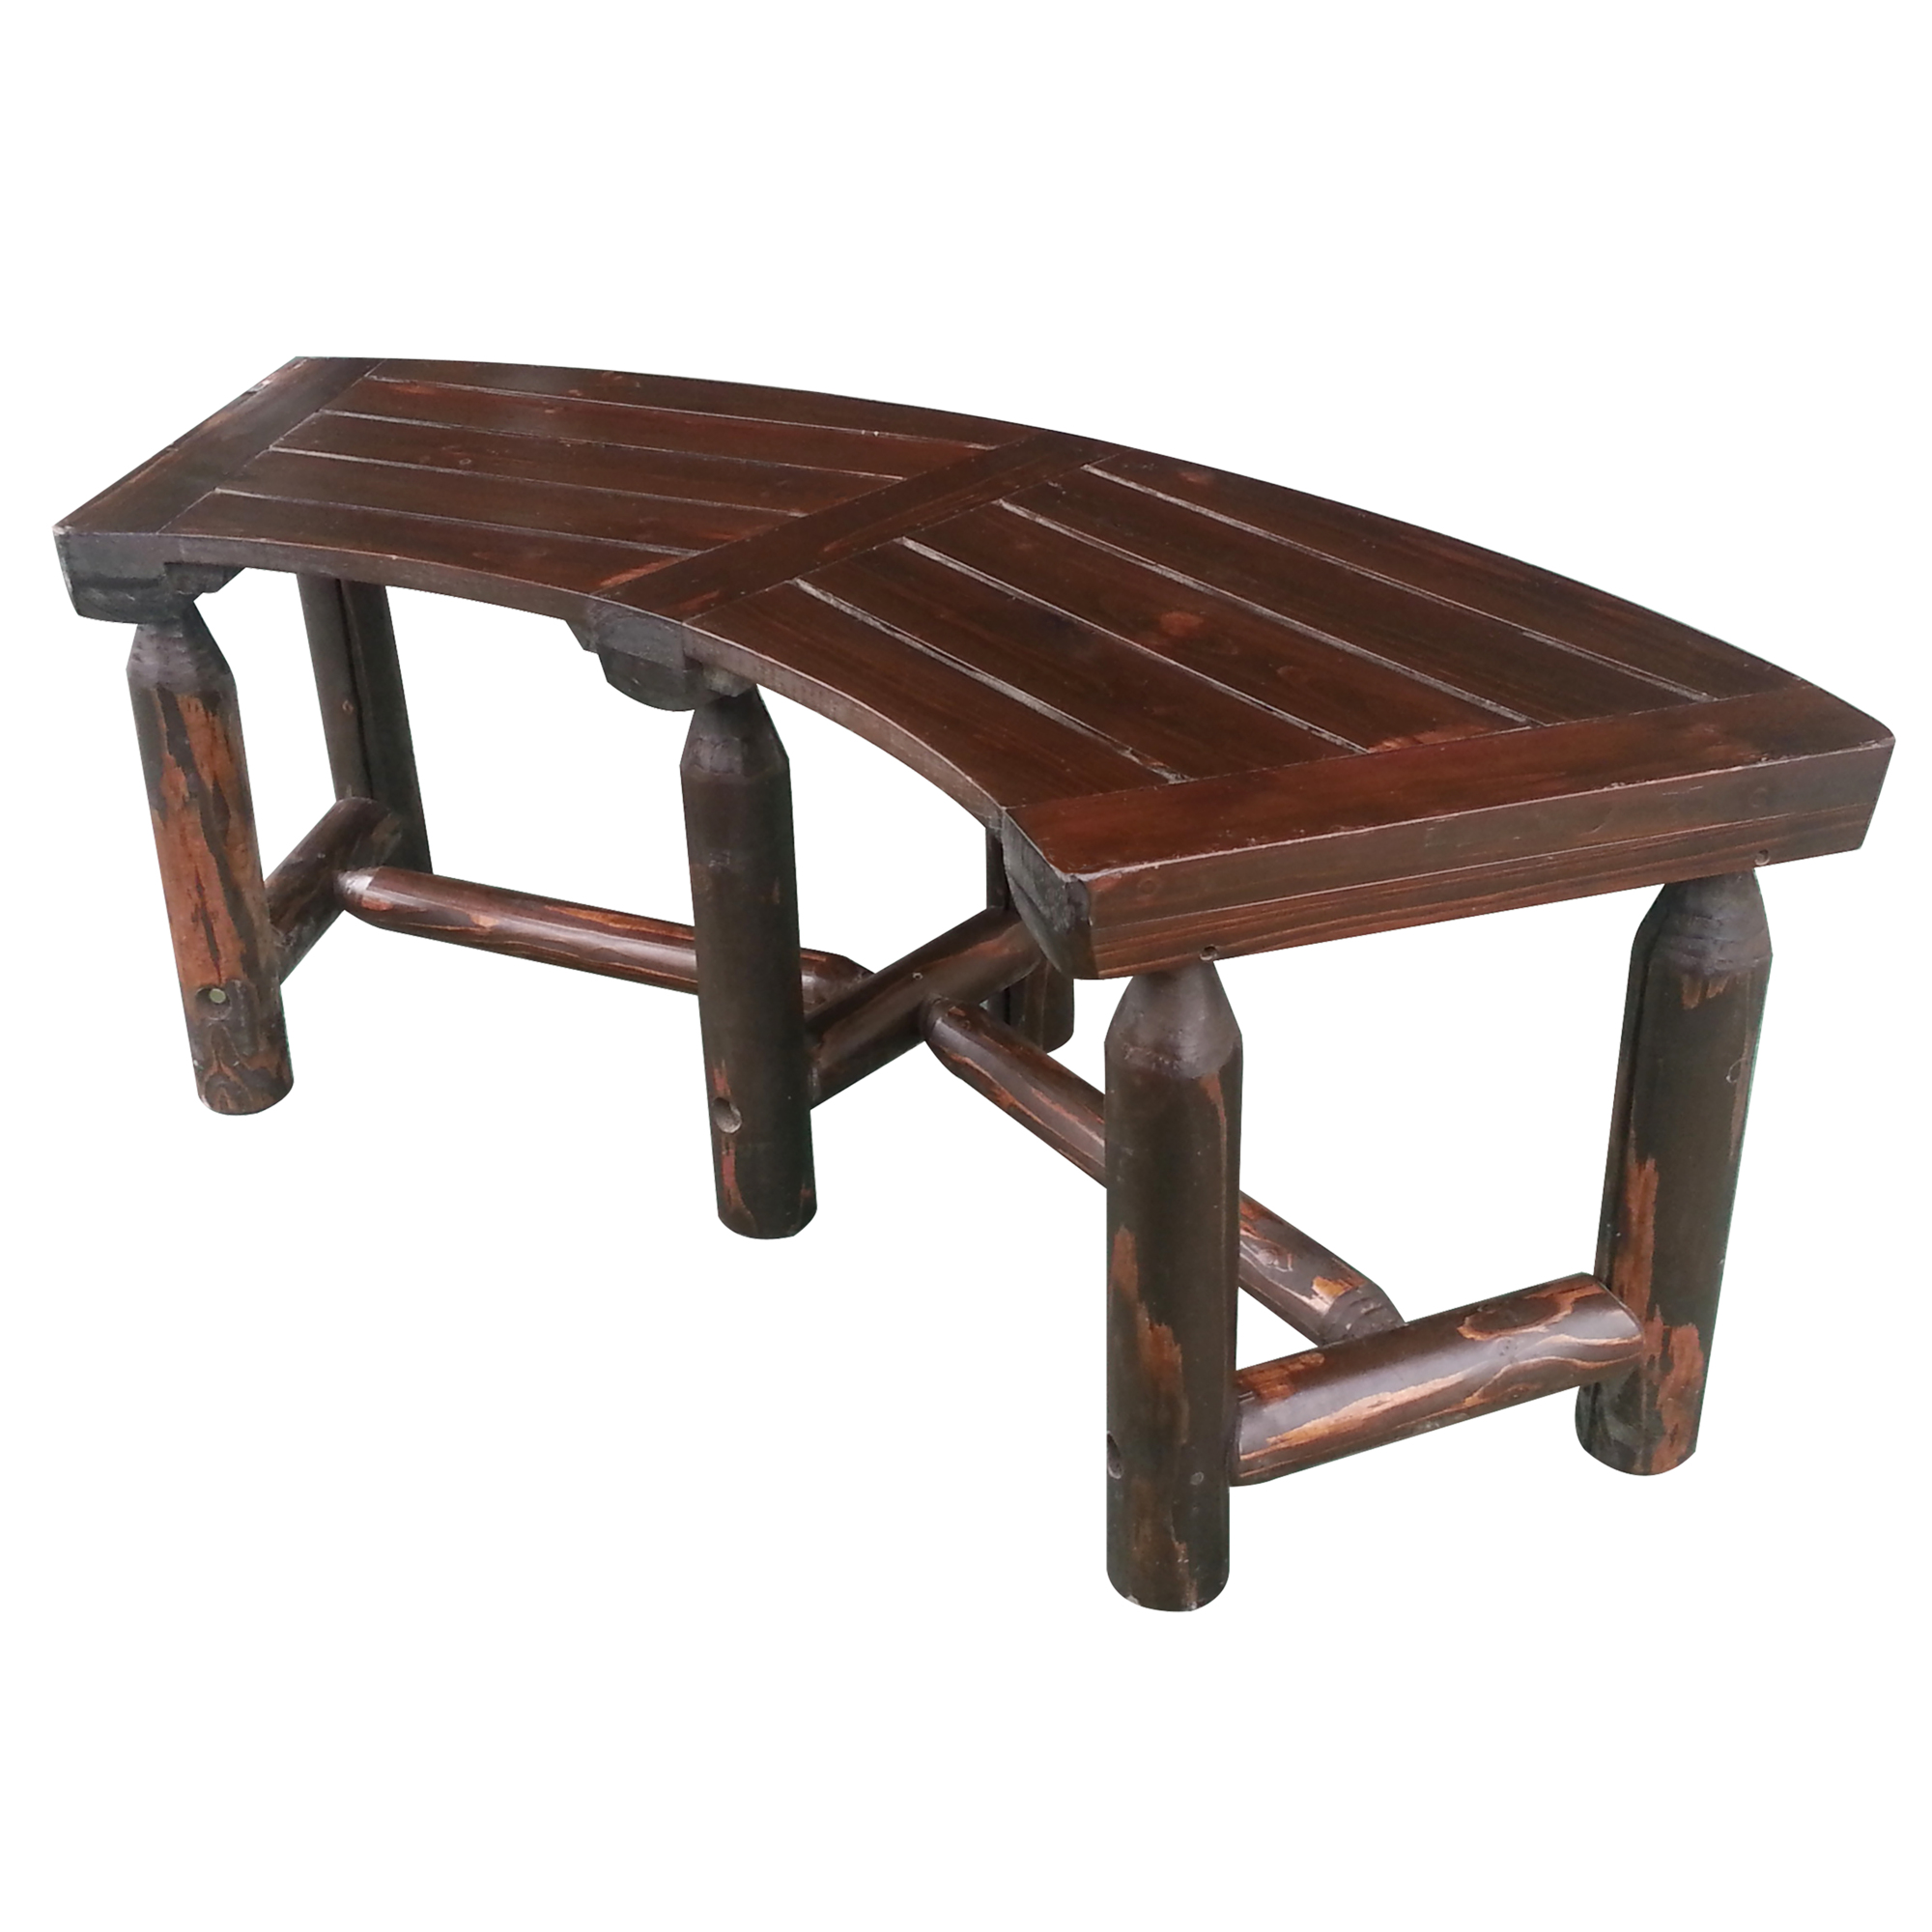 Leigh Country, Char-Log Curved Bench, Primary Color Brown, Material Wood, Width 50 in, Model TX 94017